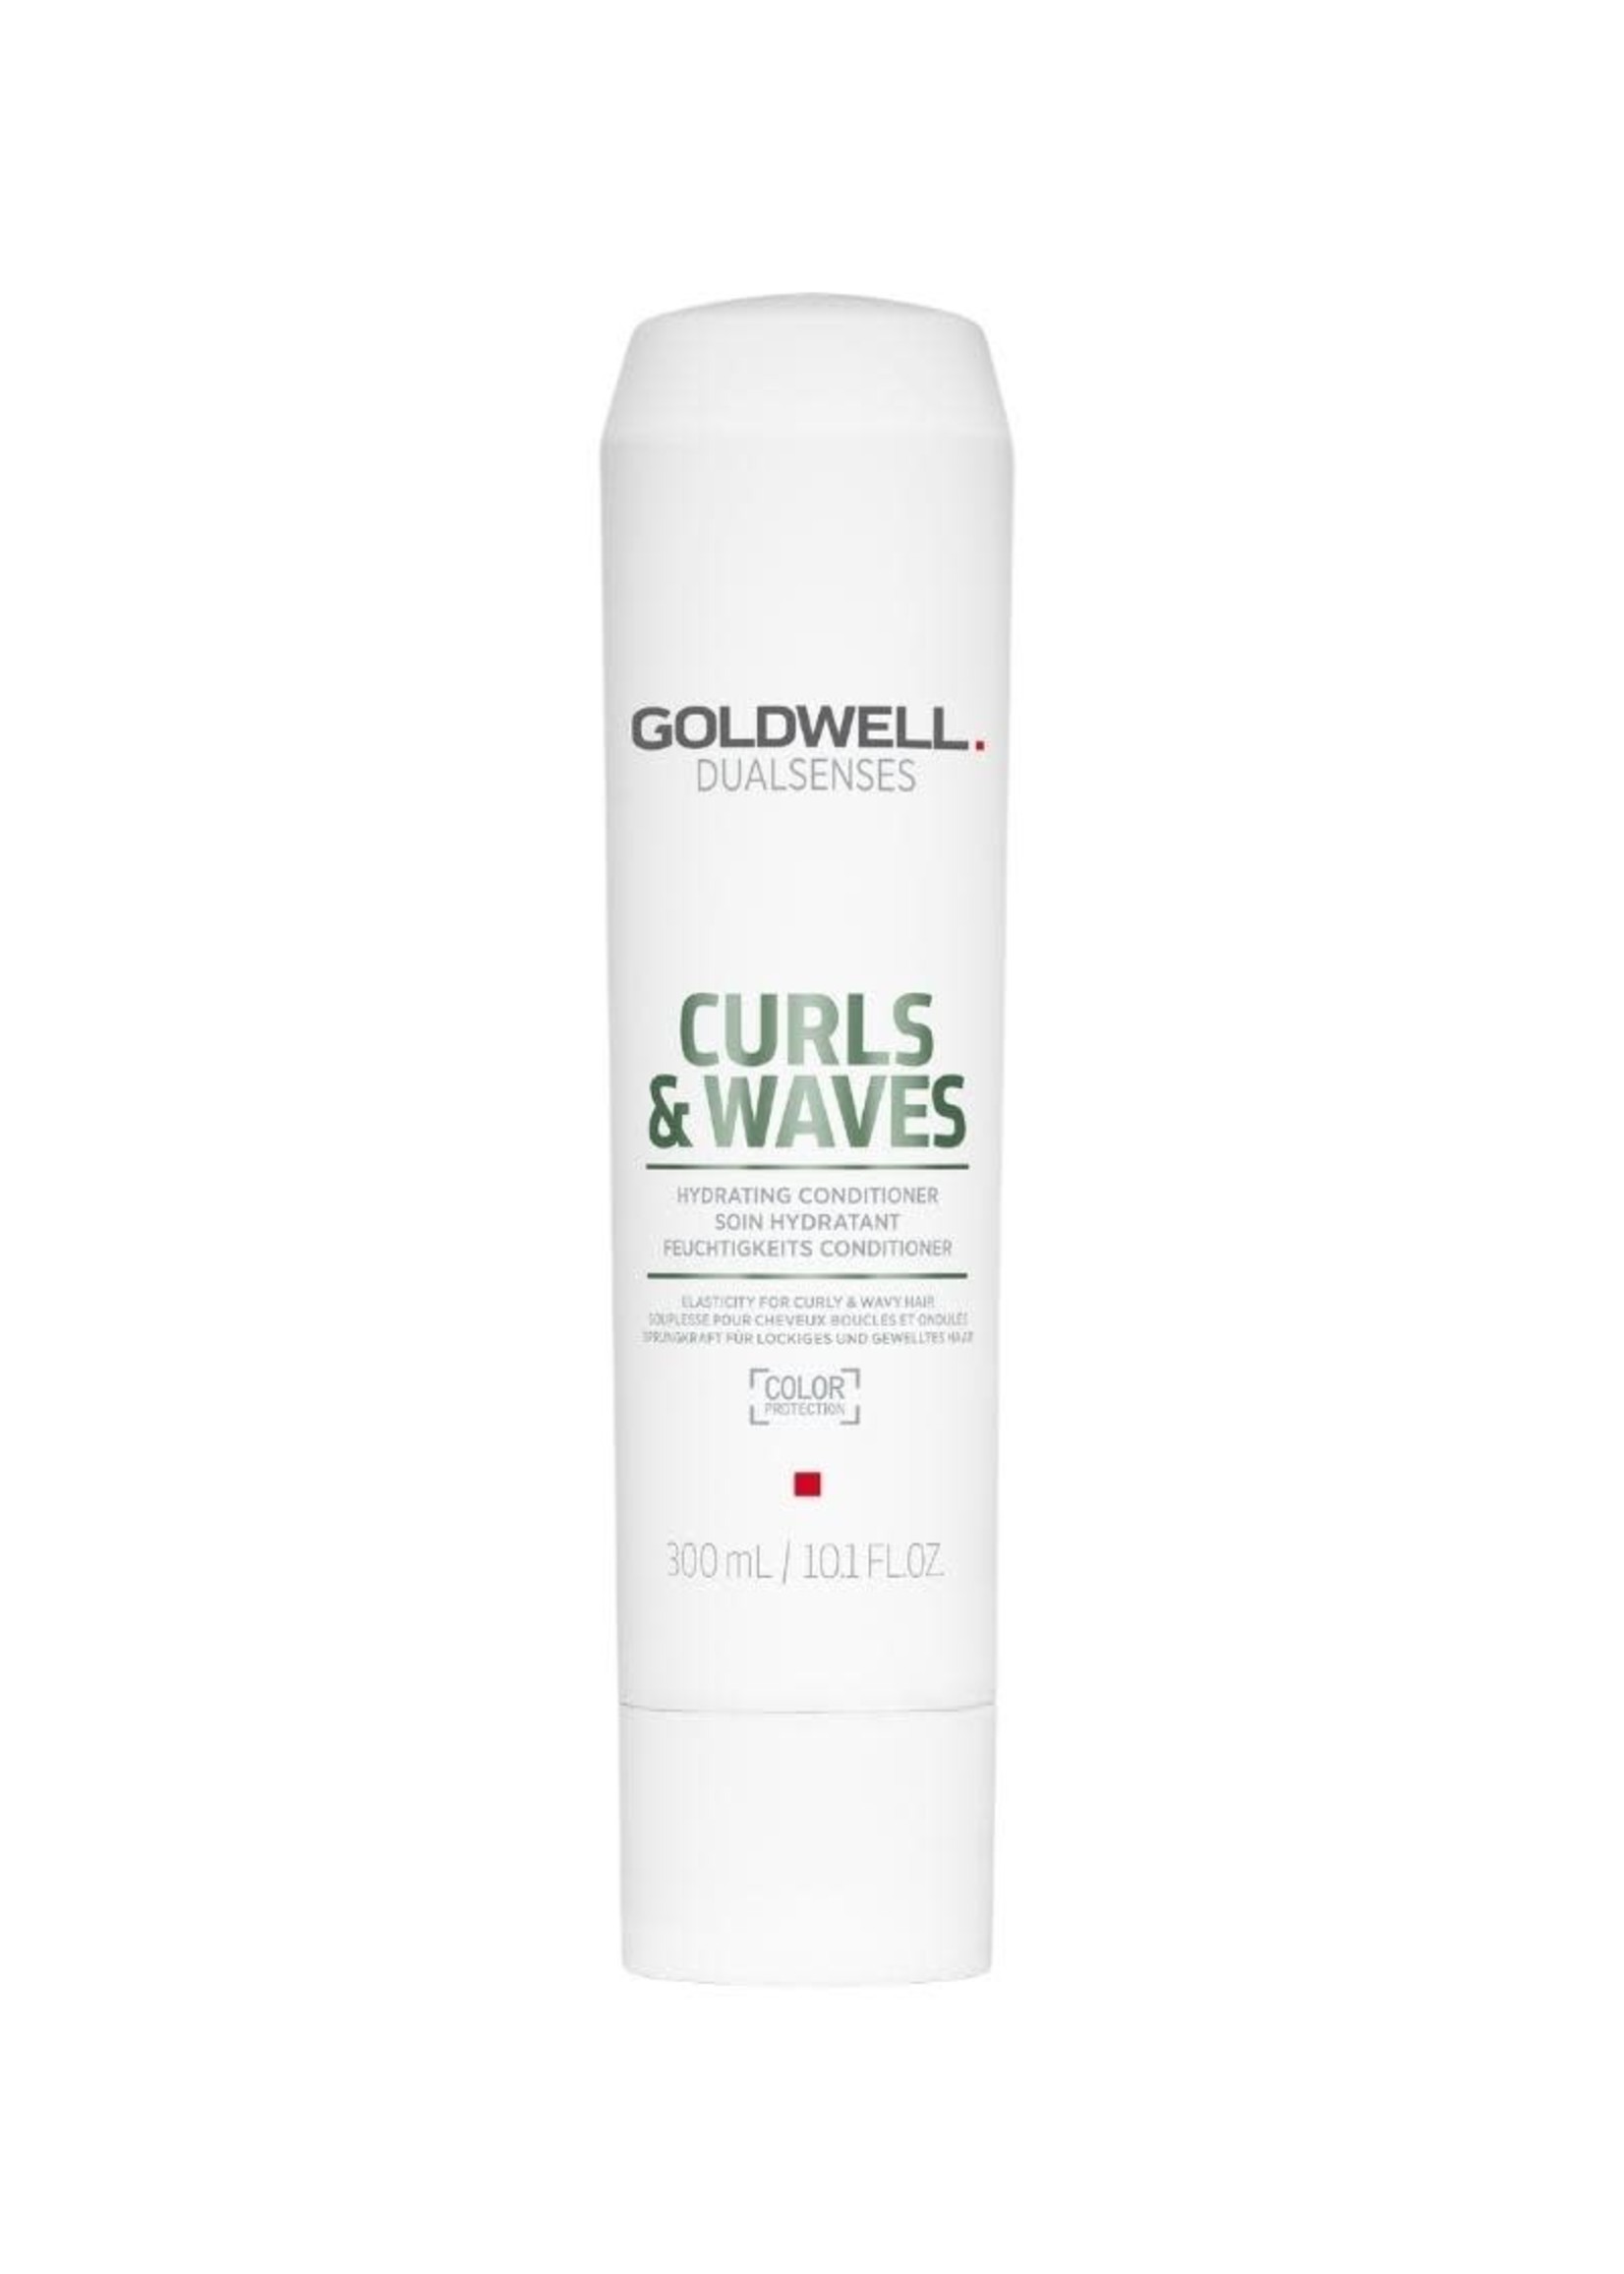 Goldwell Goldwell Dualsenses Curls & Waves Hydrating Conditioner 300ml